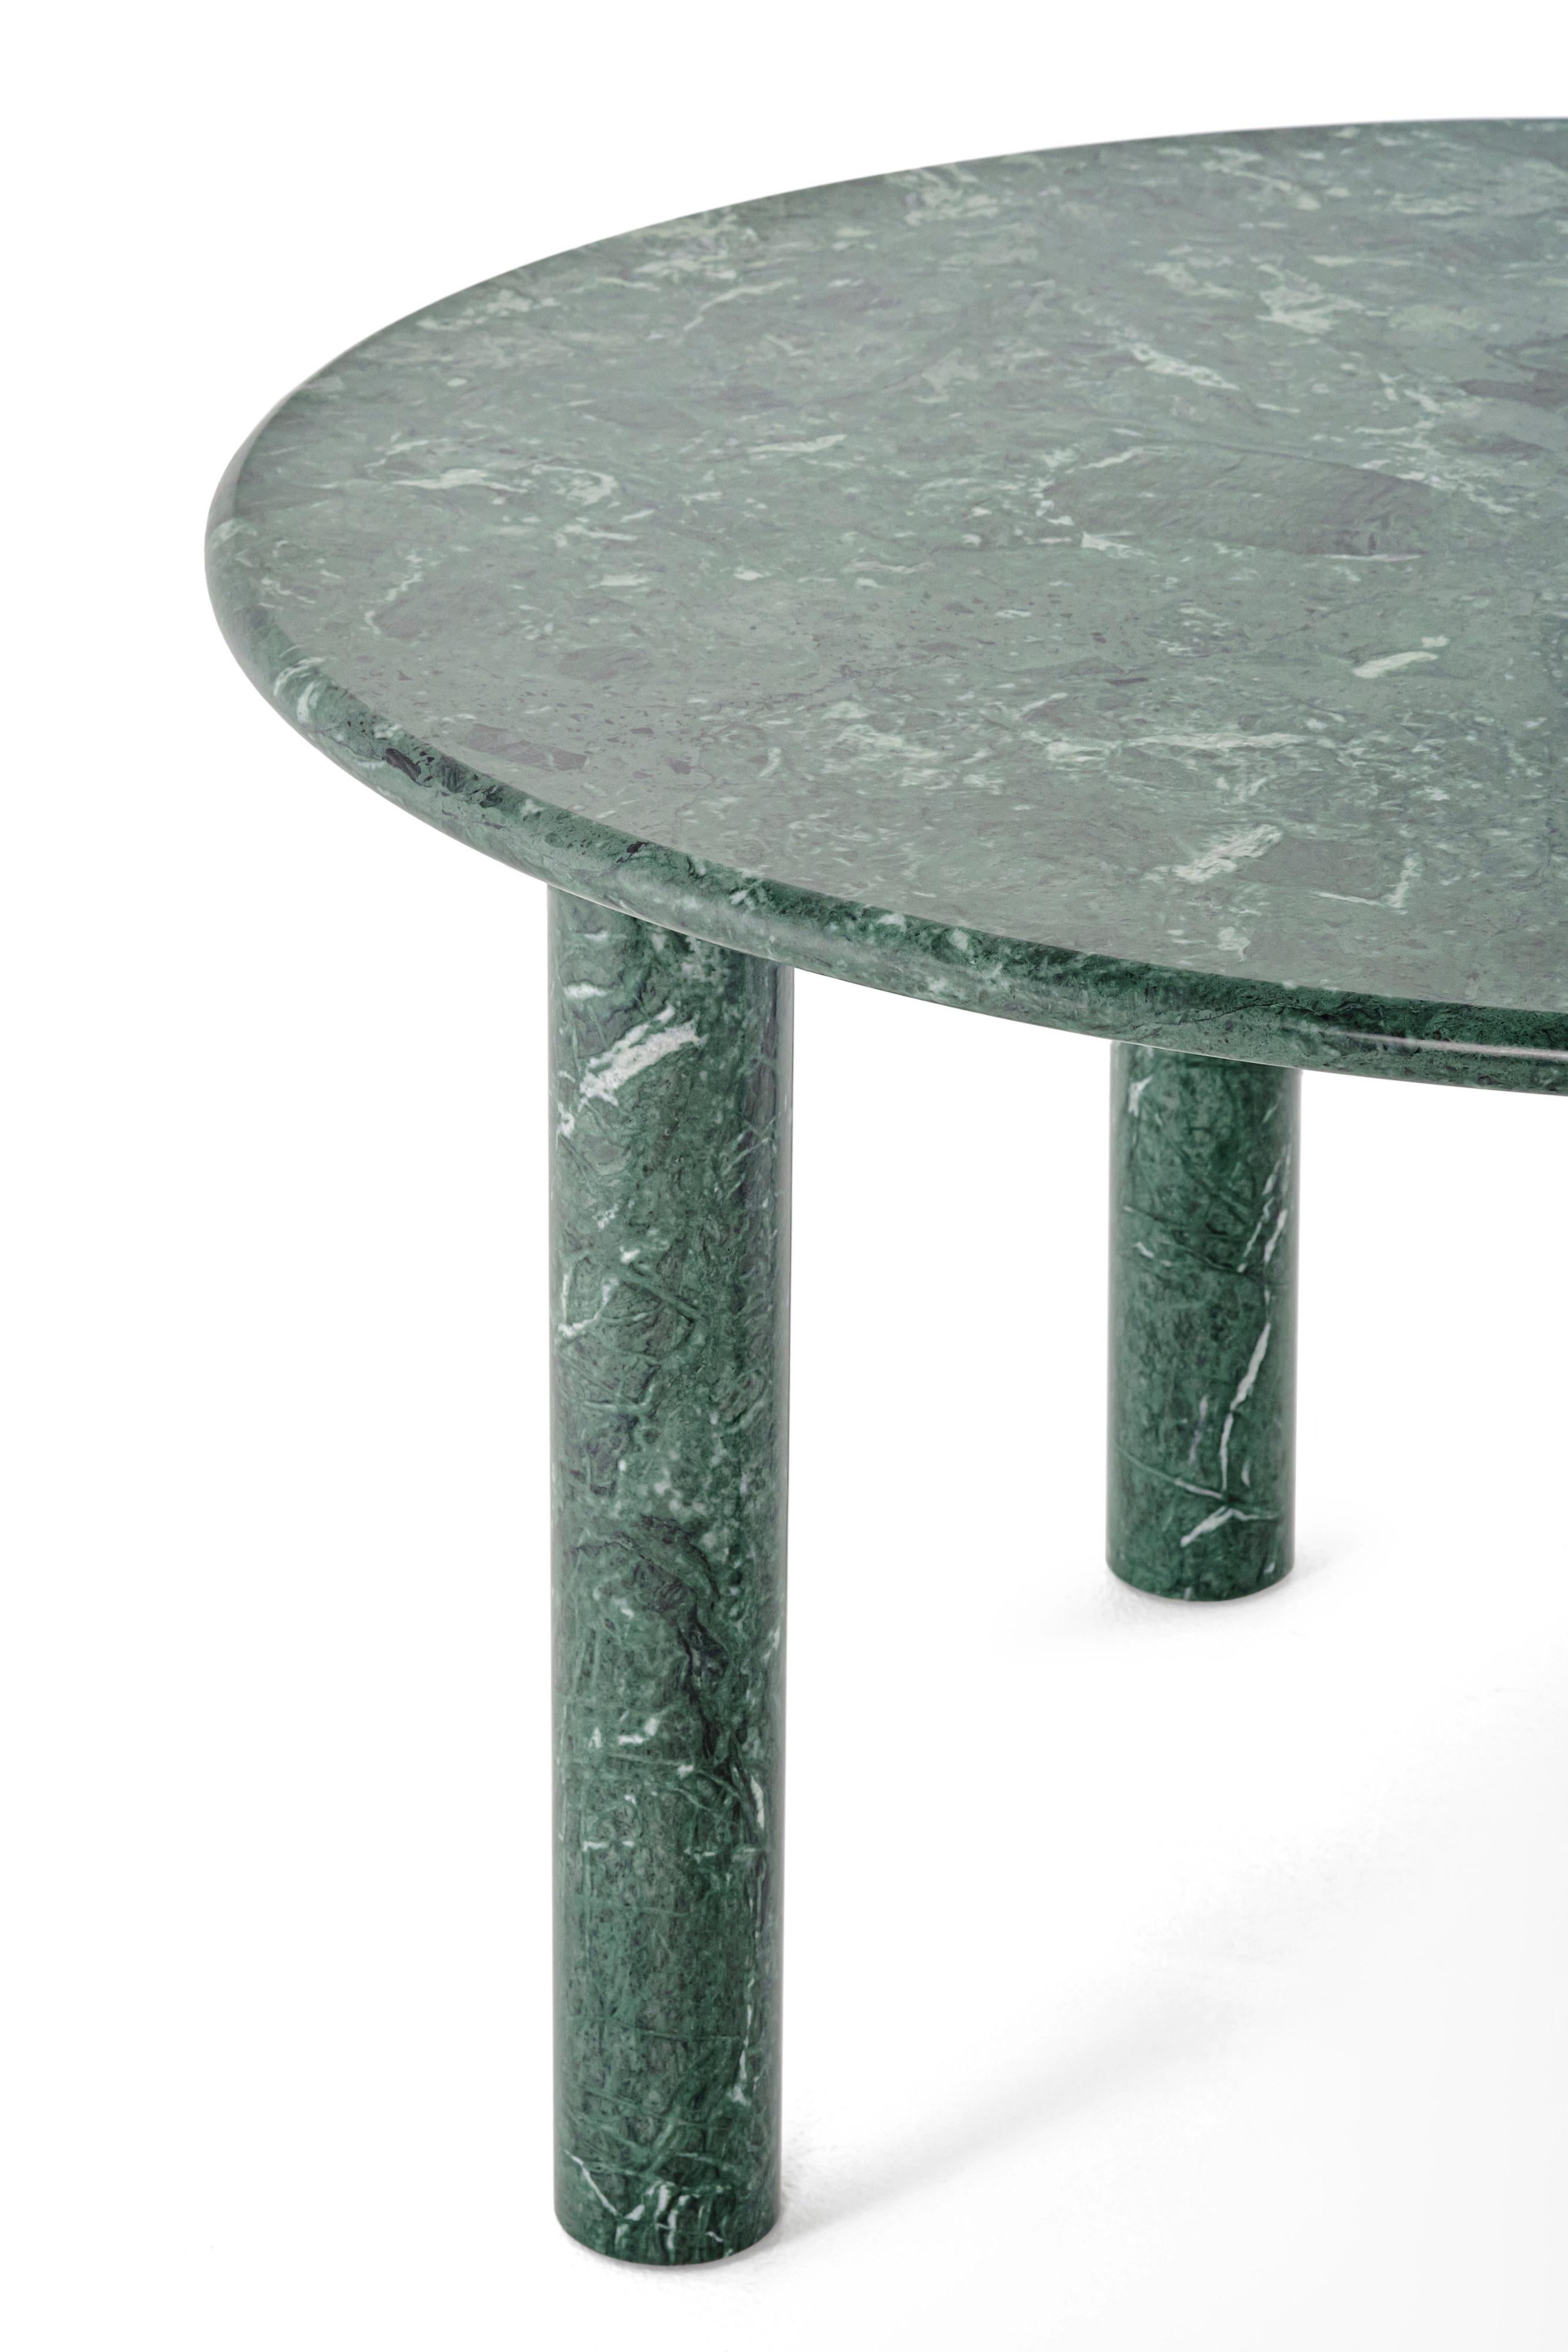 Ukrainian Contemporary Dining Round Table 'Paul' by Noom, Green Marble For Sale